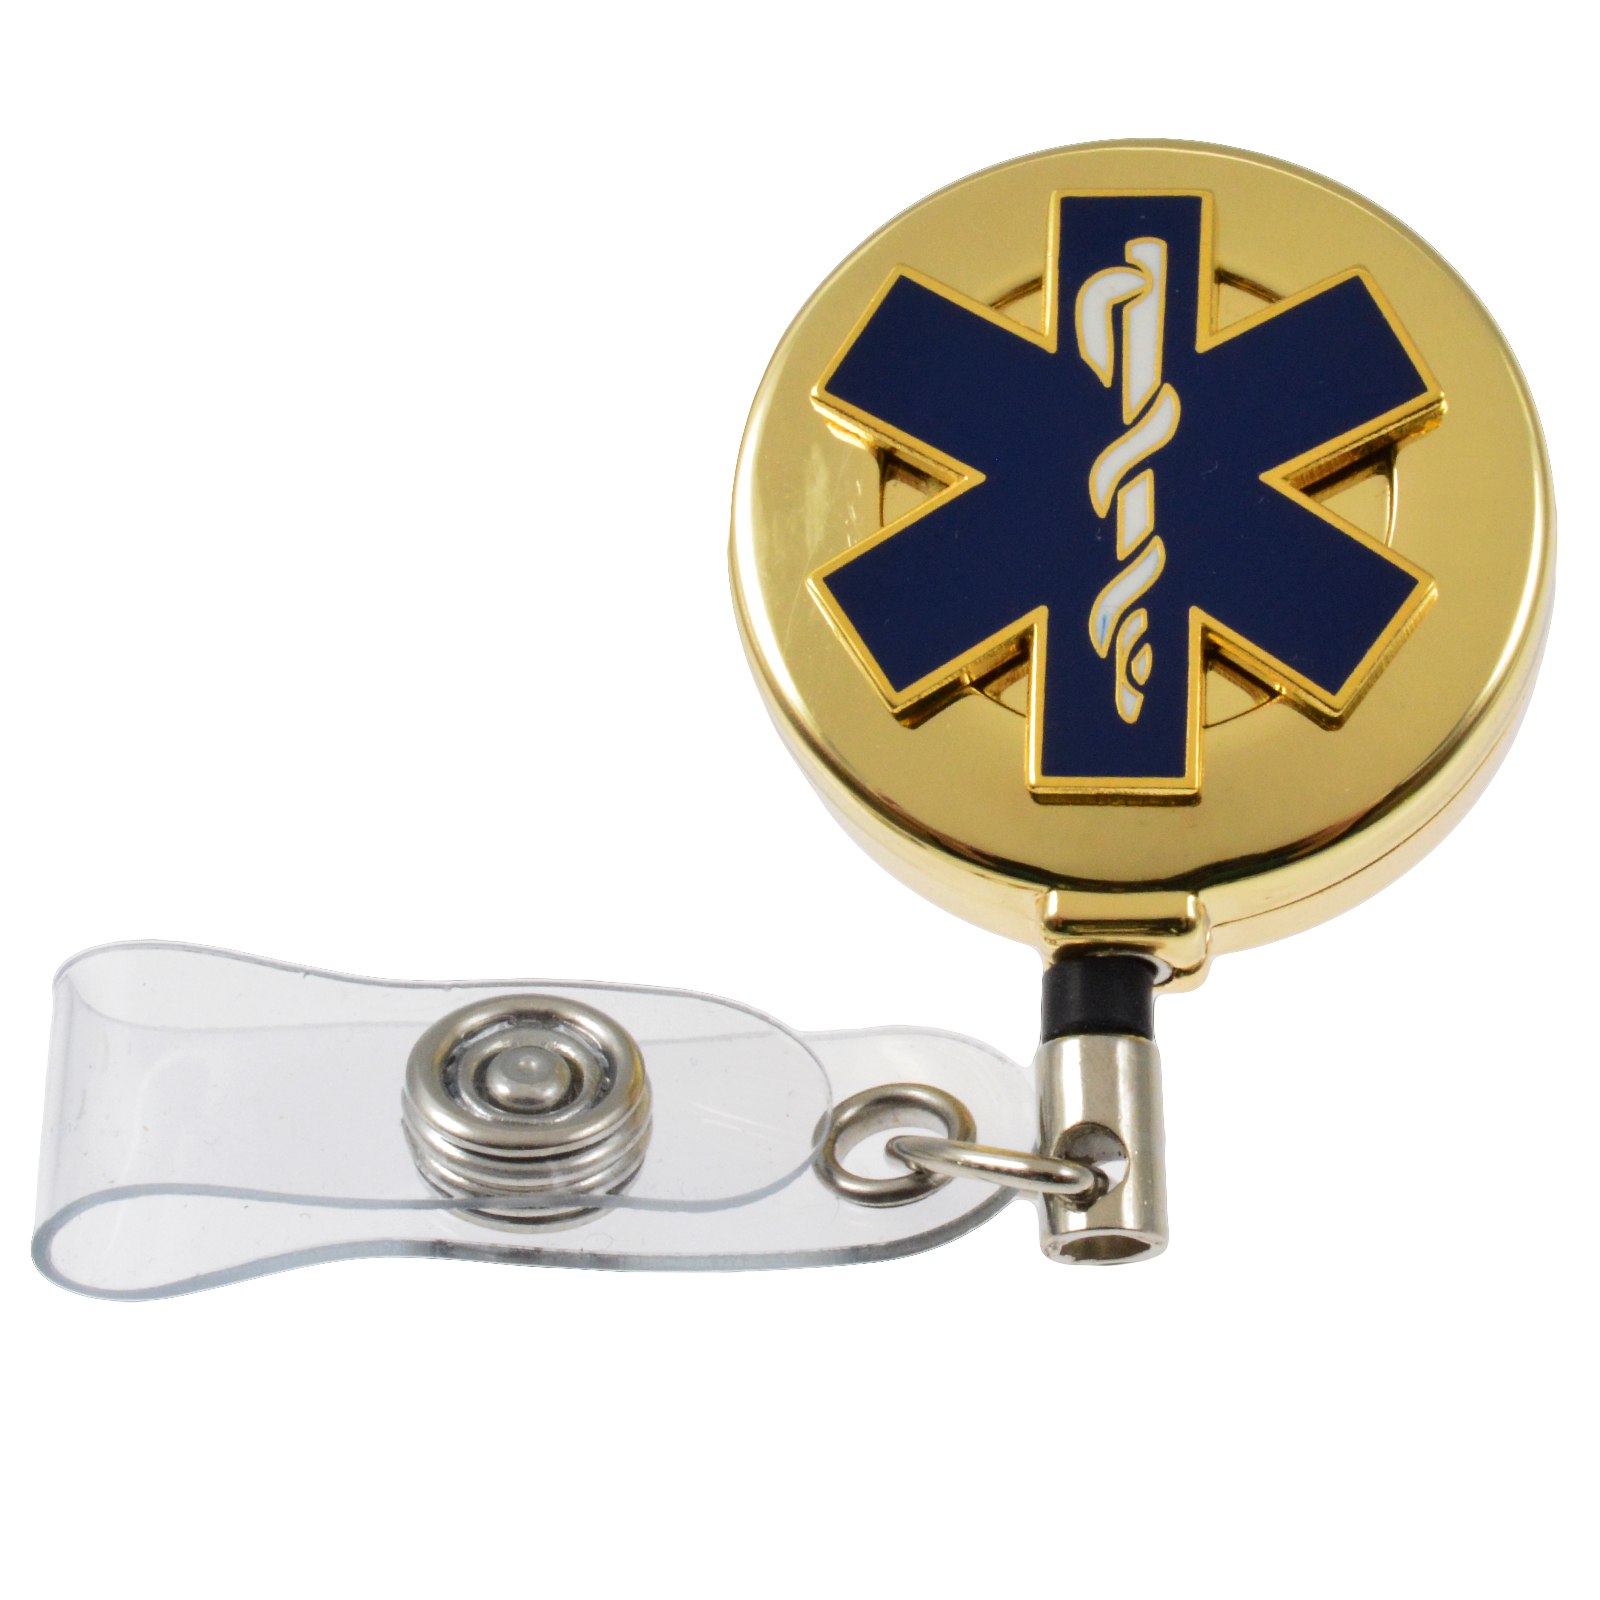 Star of Life EMS EMT Retractable ID holder (Gold)